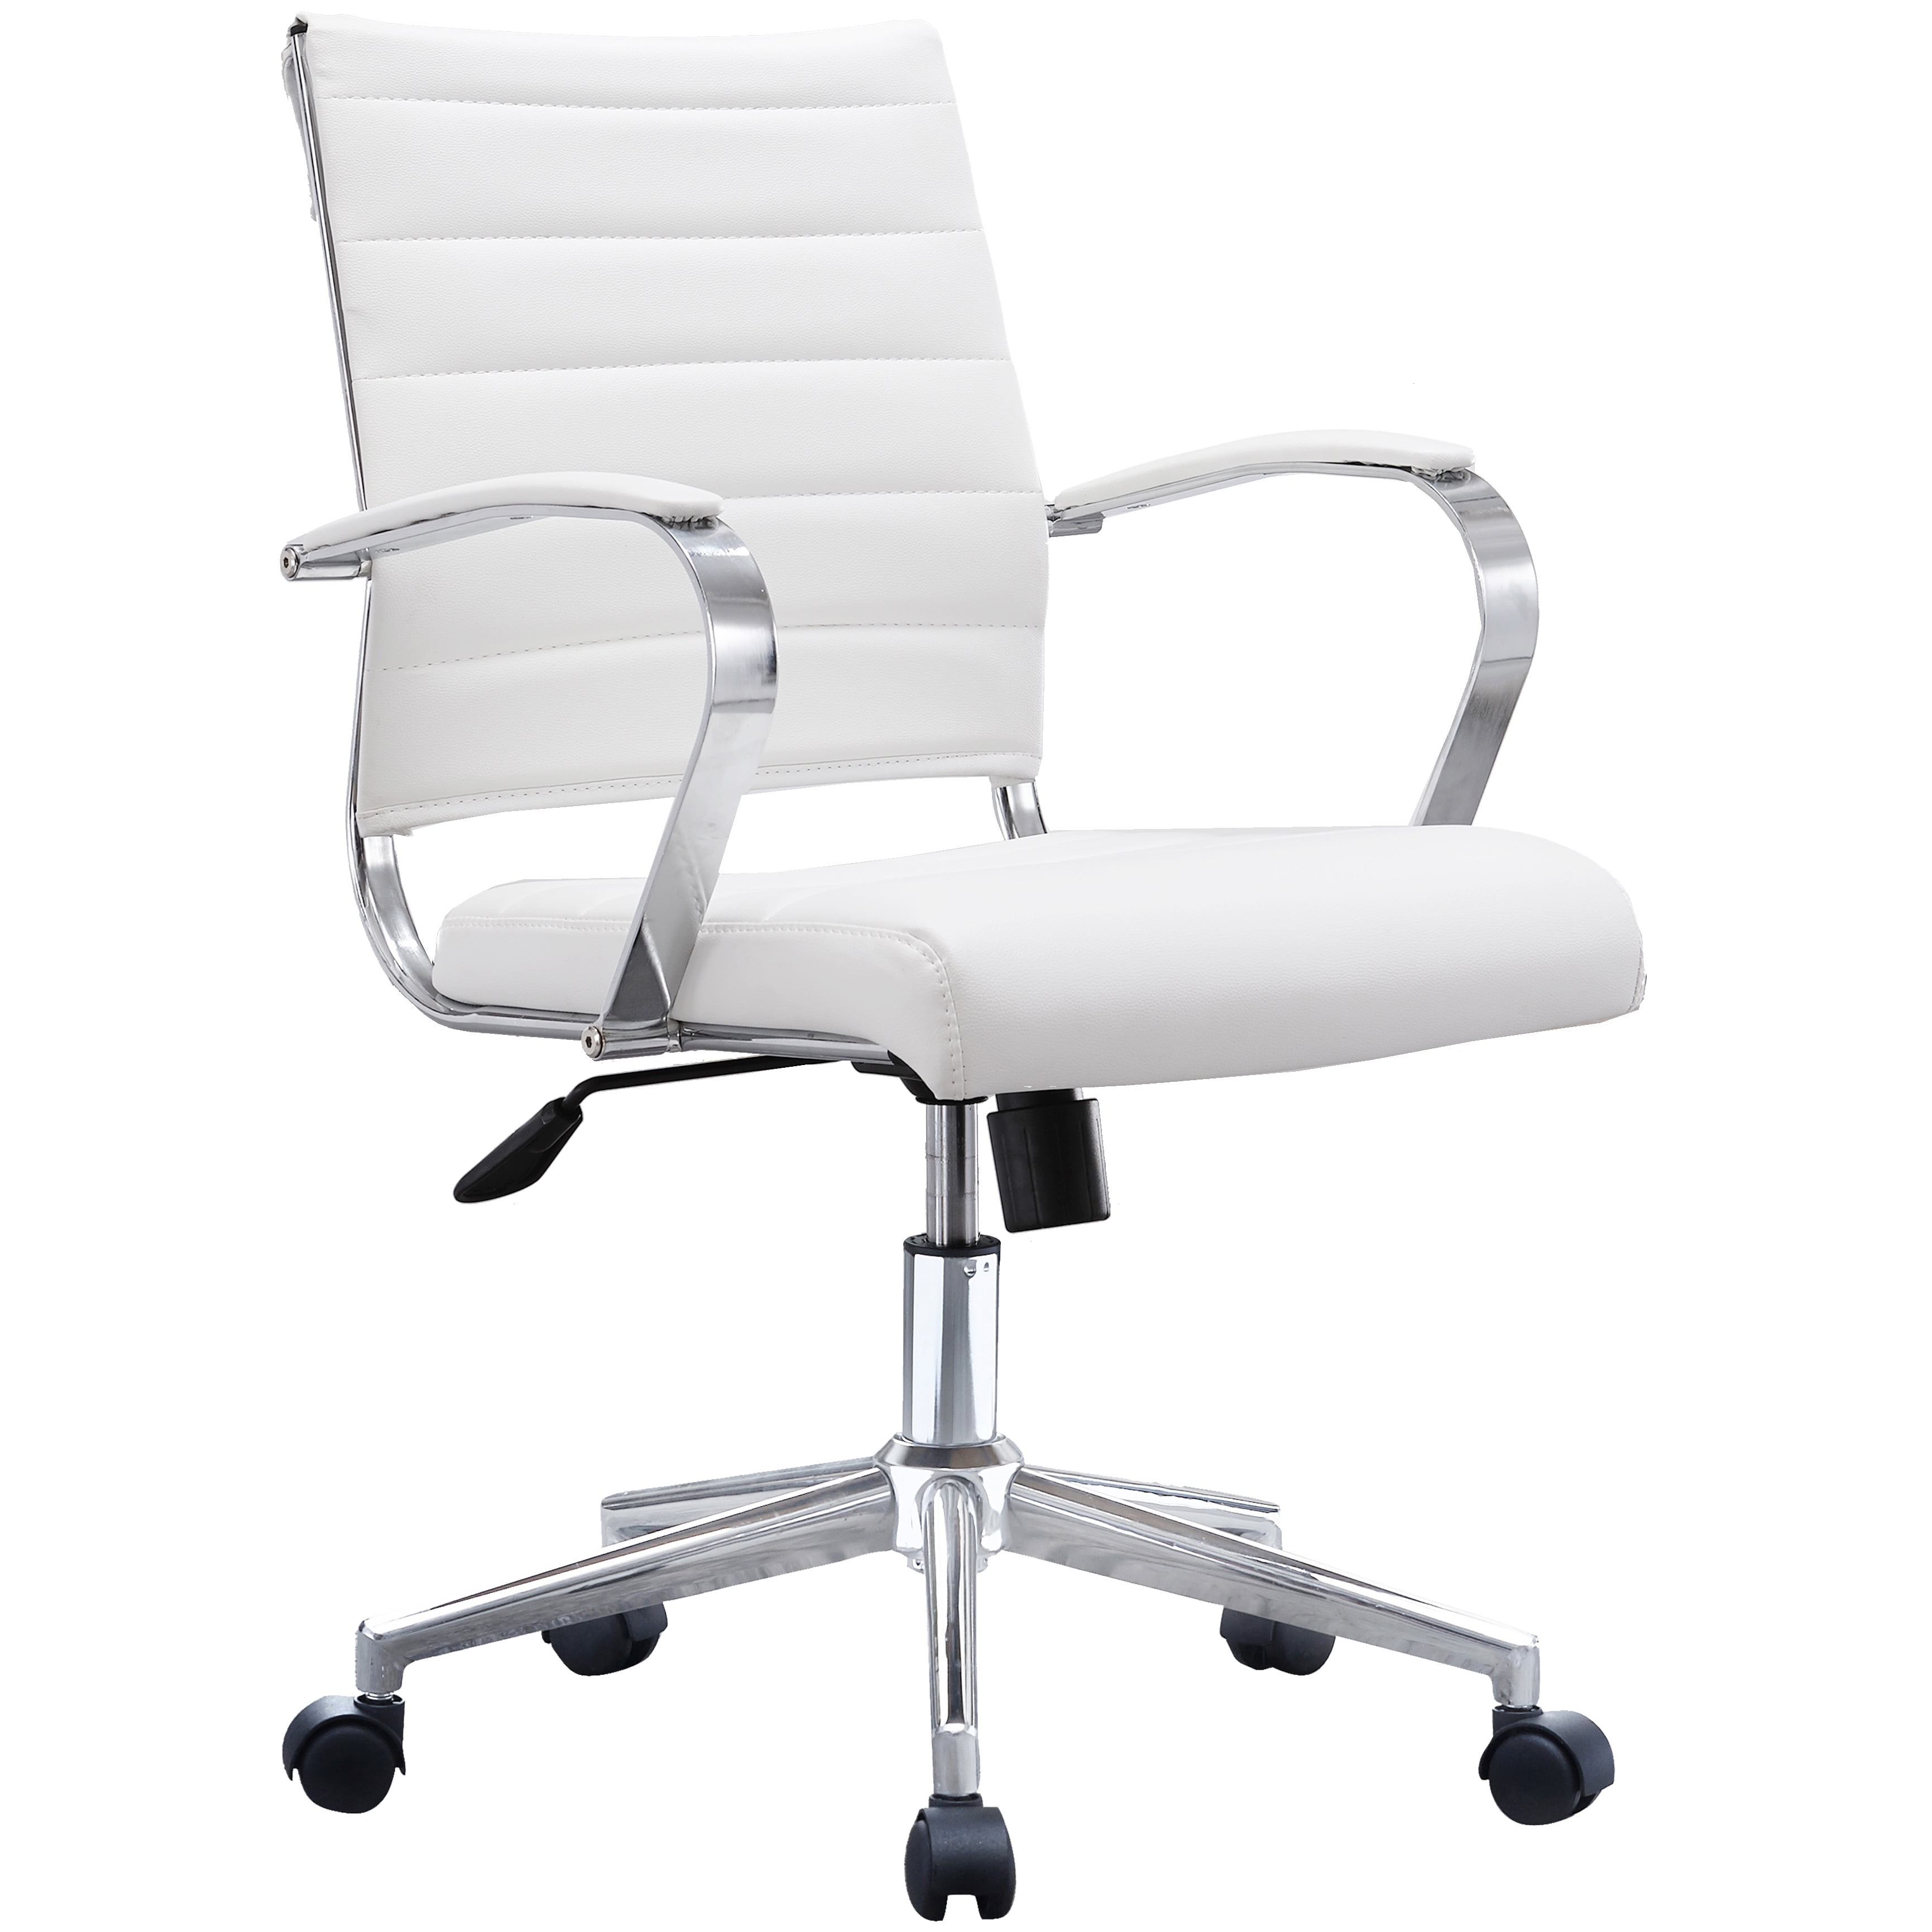 Office Mid-Back Executive Desk Chair Leather Ergonomic Swivel Conference Chair 